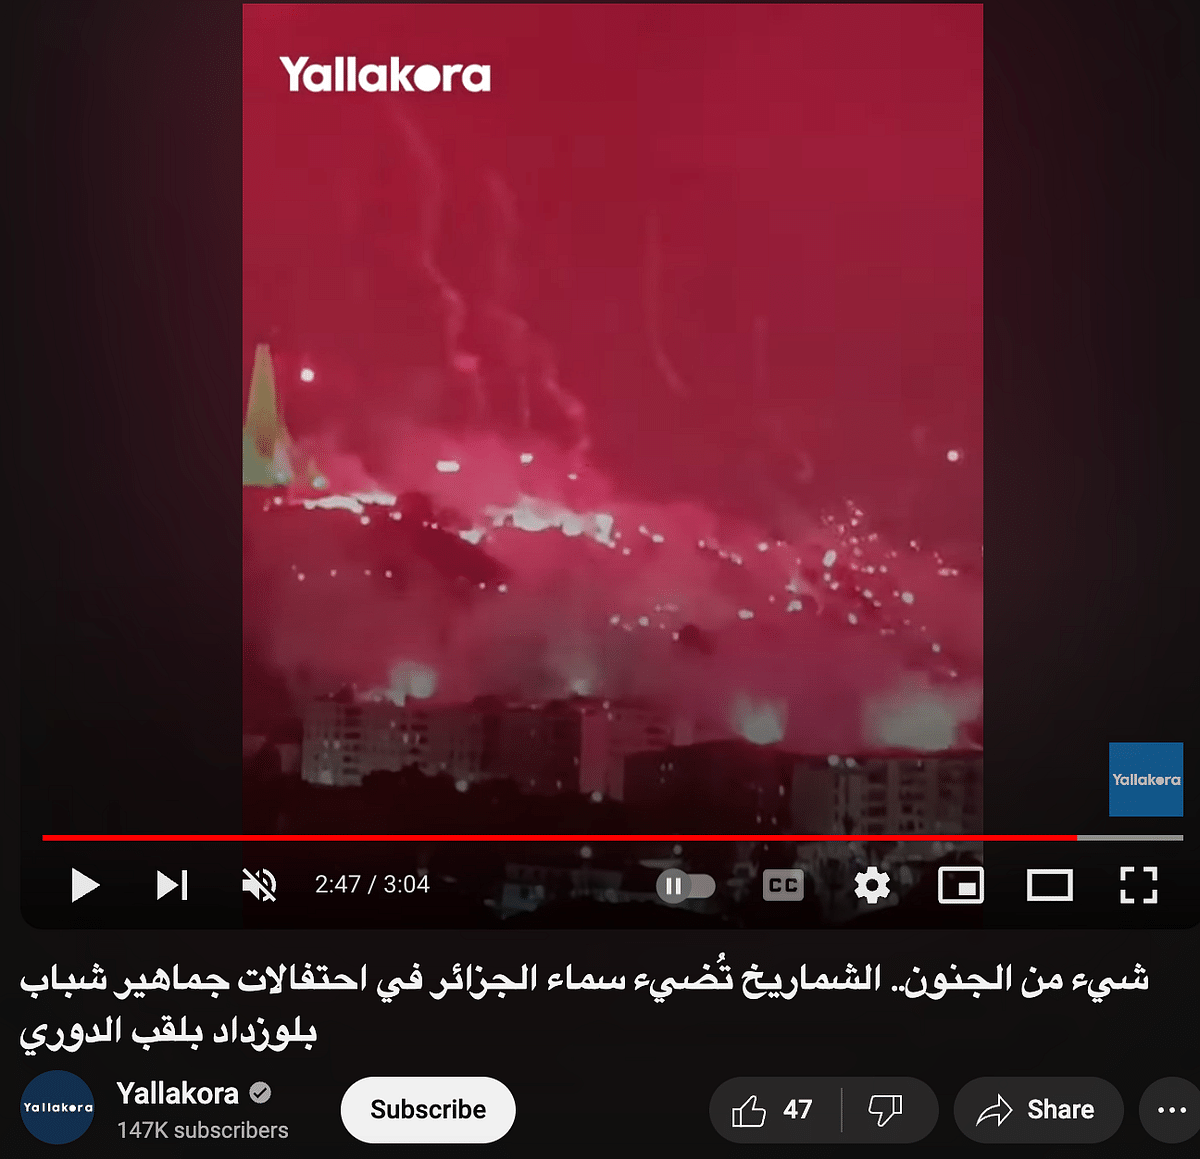 The video is reportedly from Algeria and shows fans of football club CR Belouizdad celebrating.